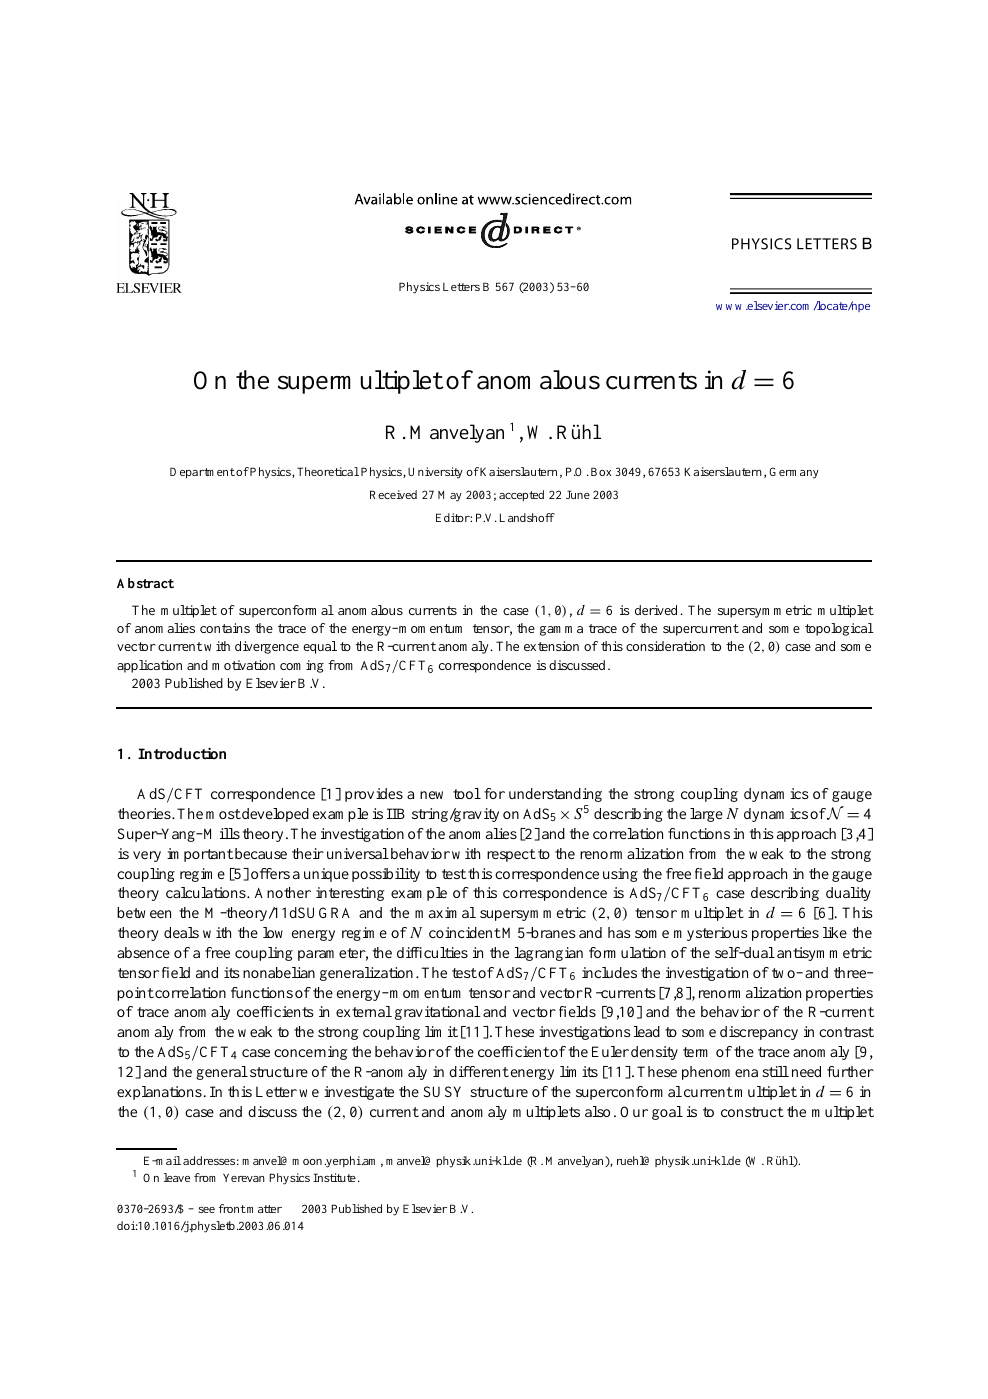 On The Supermultiplet Of Anomalous Currents In D 6 Topic Of Research Paper In Physical Sciences Download Scholarly Article Pdf And Read For Free On Cyberleninka Open Science Hub